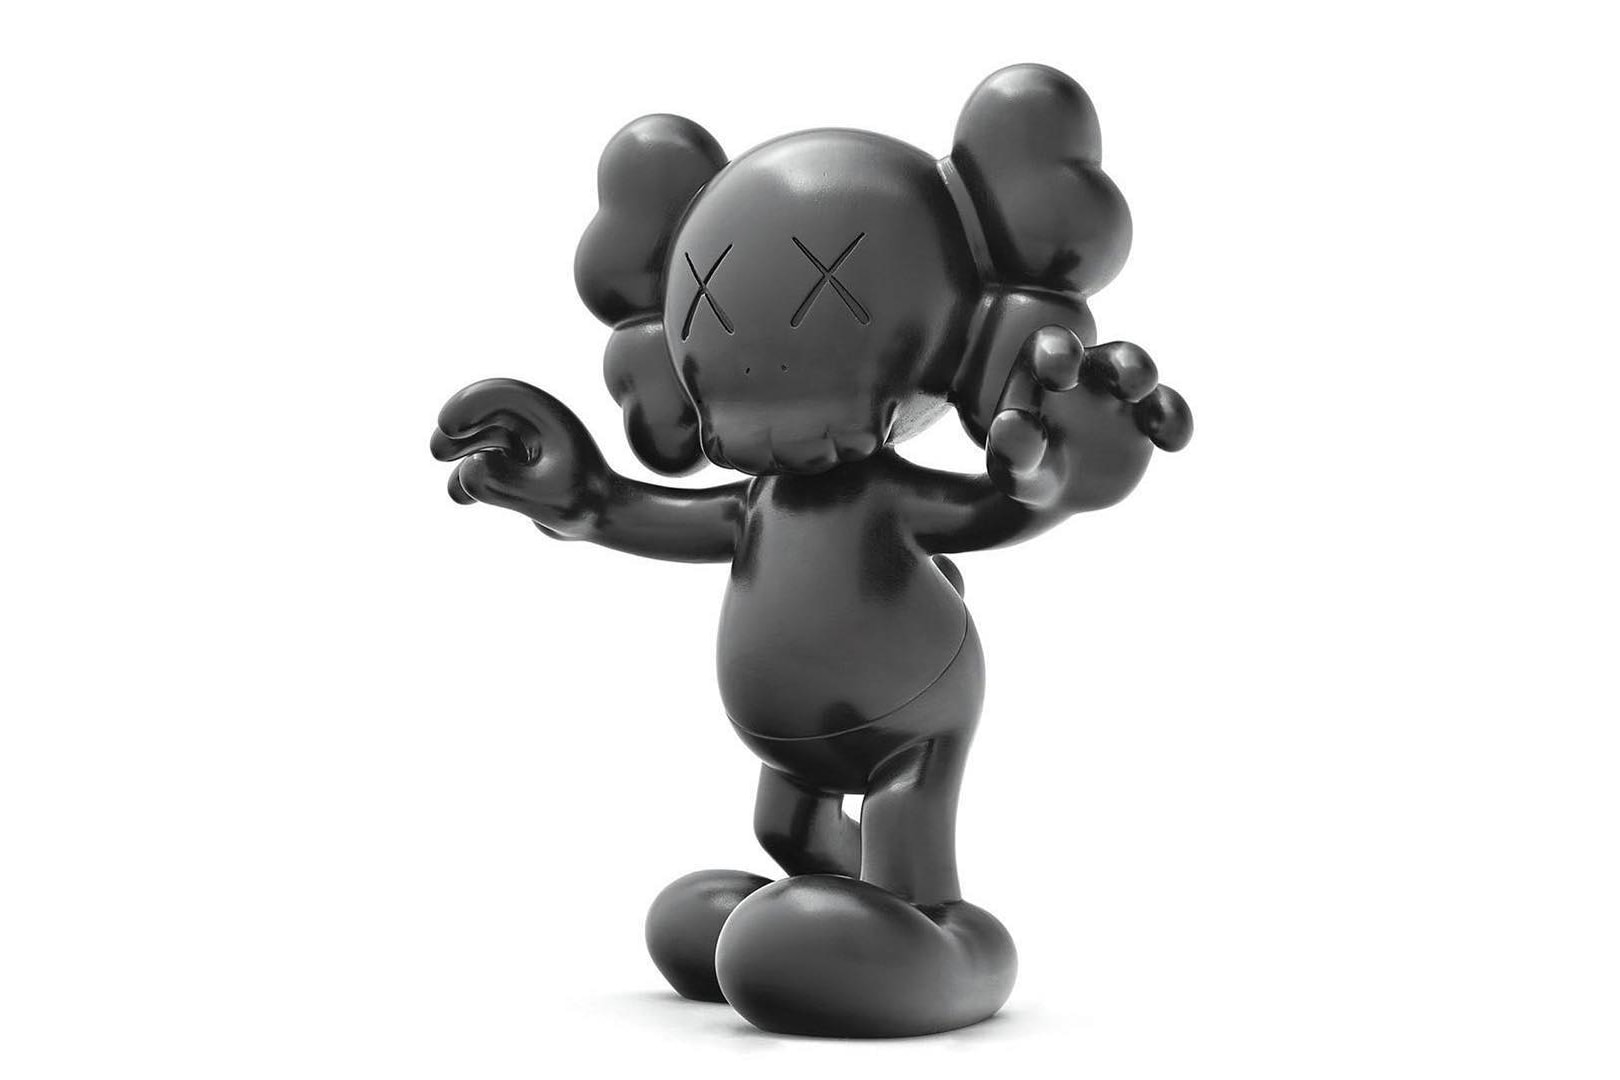 KAWS Pace Prints final days figure collectible bronze 2018 limited 25 pieces edition art basel hong kong